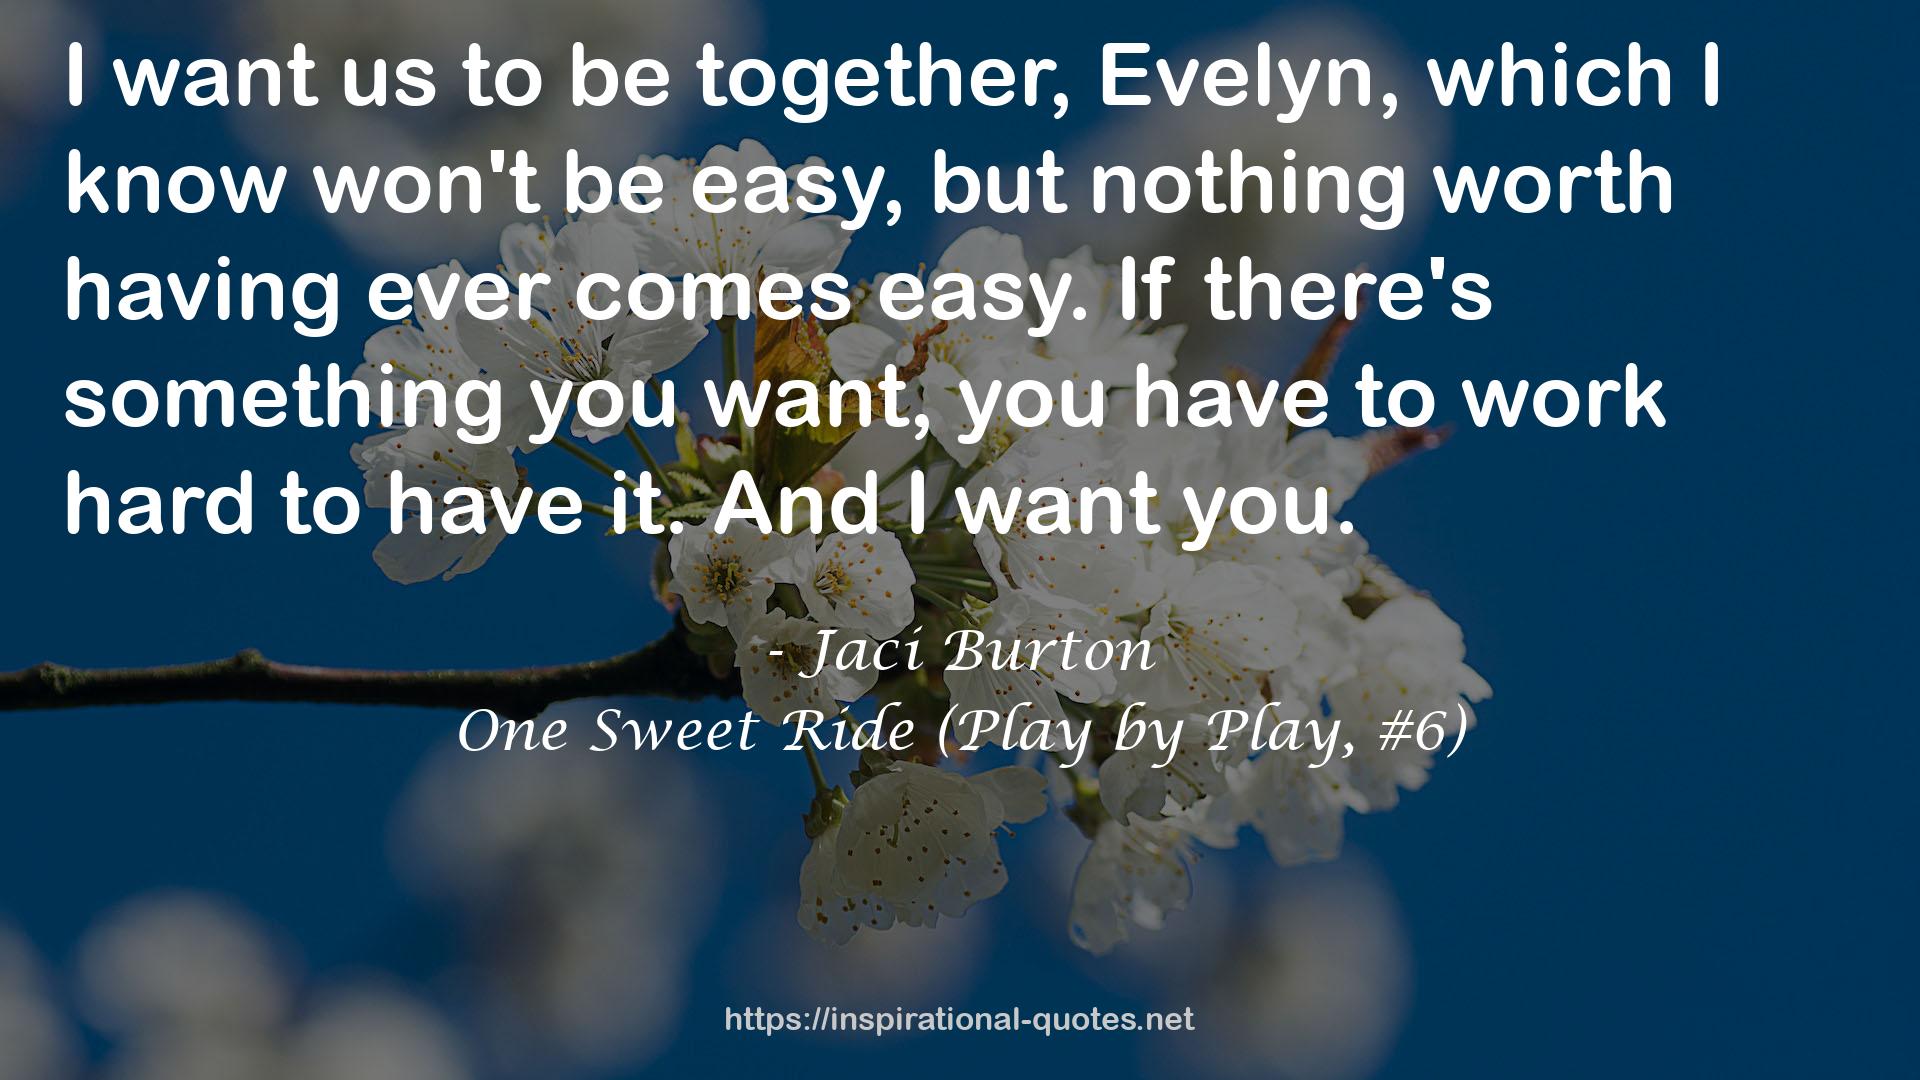 One Sweet Ride (Play by Play, #6) QUOTES